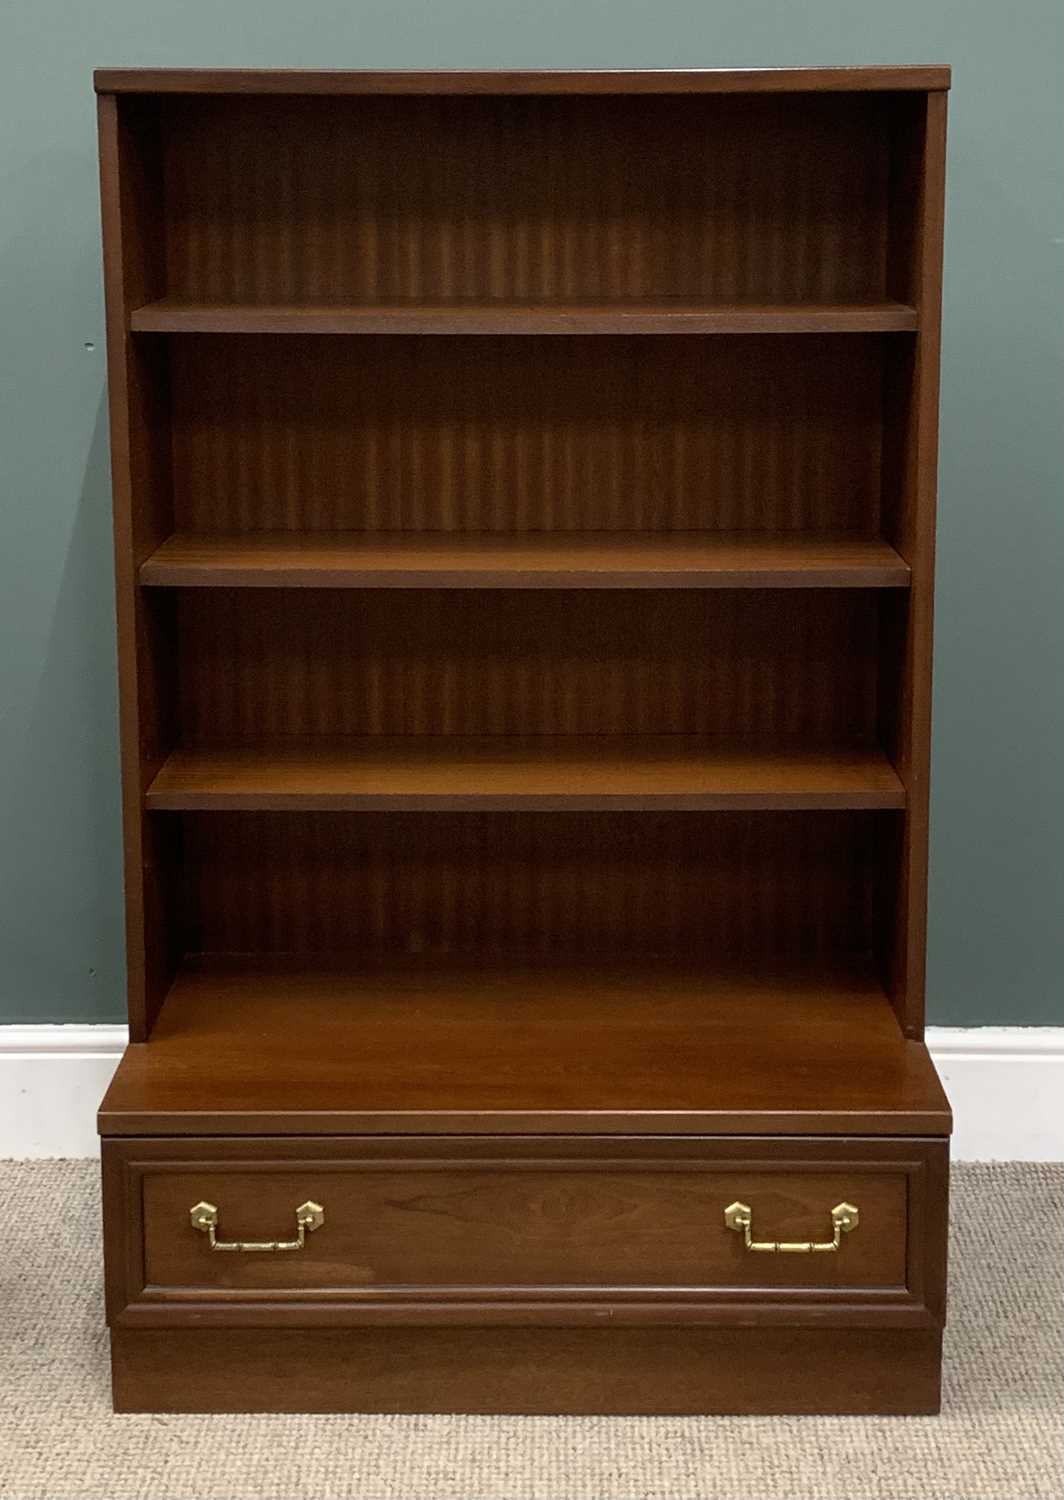 G-PLAN REPRODUCTION MAHOGANY BOOKCASE with base drawer, 130 (h) x 82 (w) x 46 (d) cms, TABLETOP - Image 2 of 6